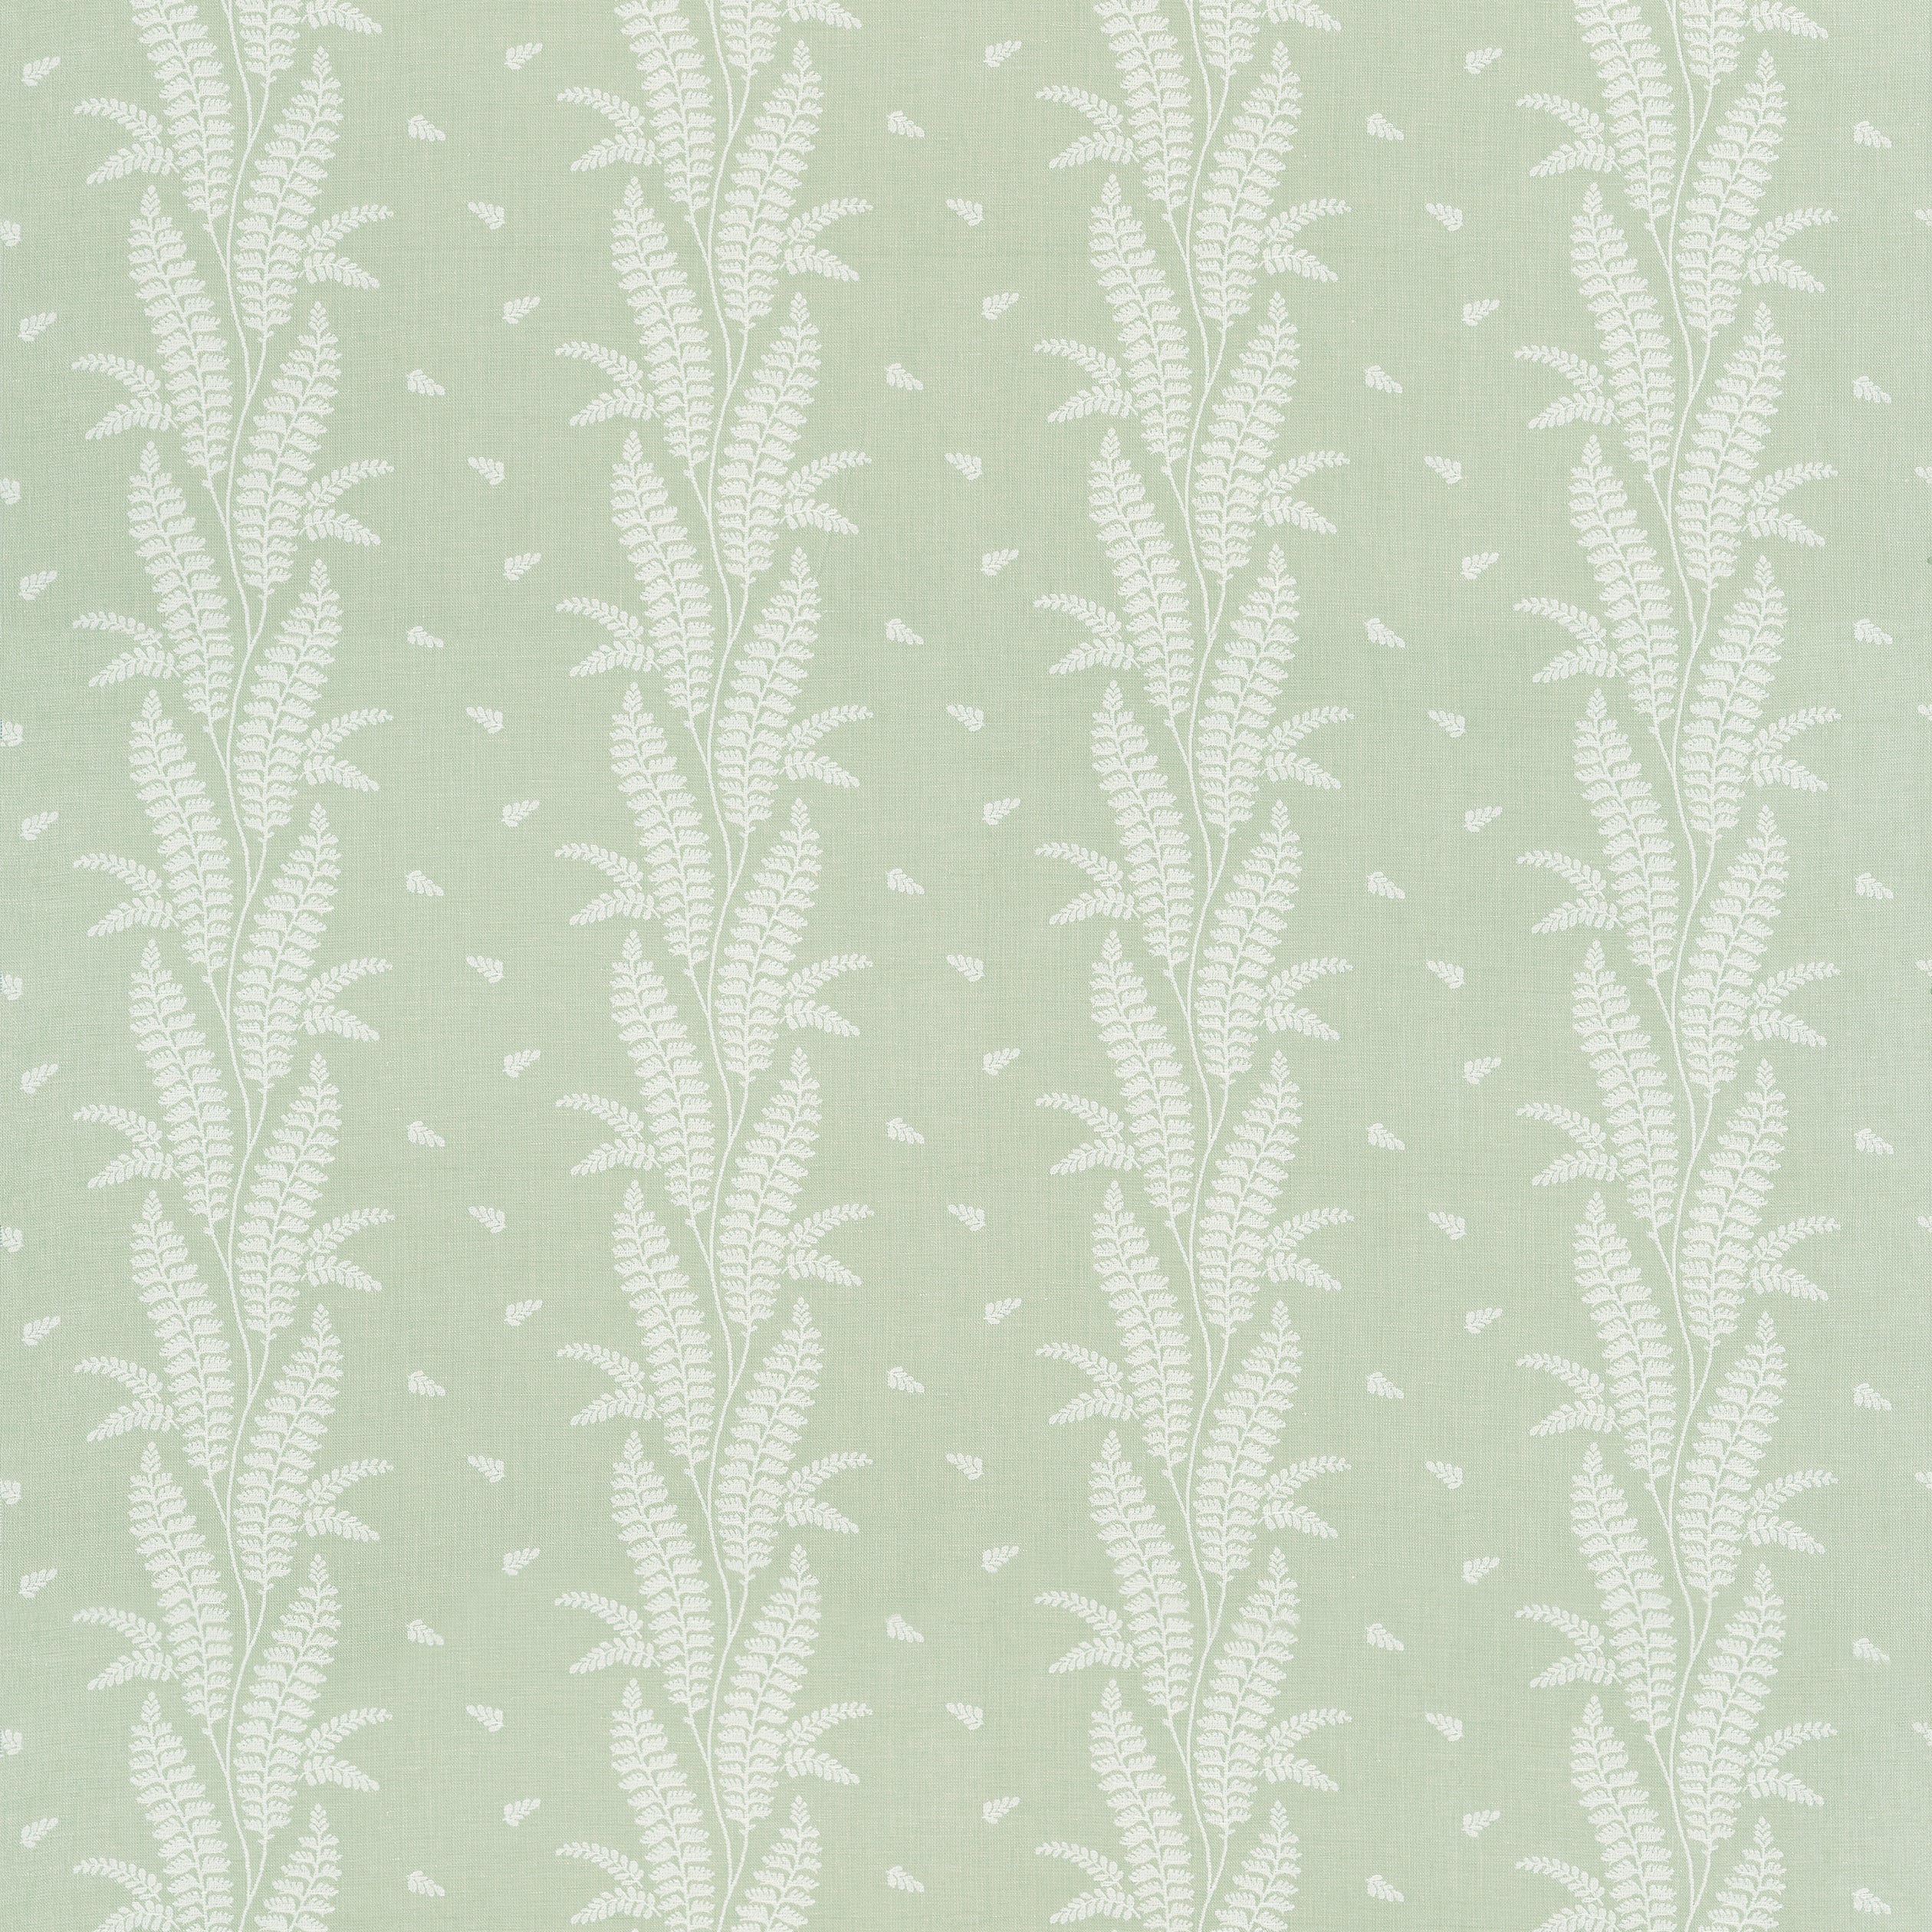 Ensbury Fern fabric in green color - pattern number AW57826 - by Anna French in the Bristol collection